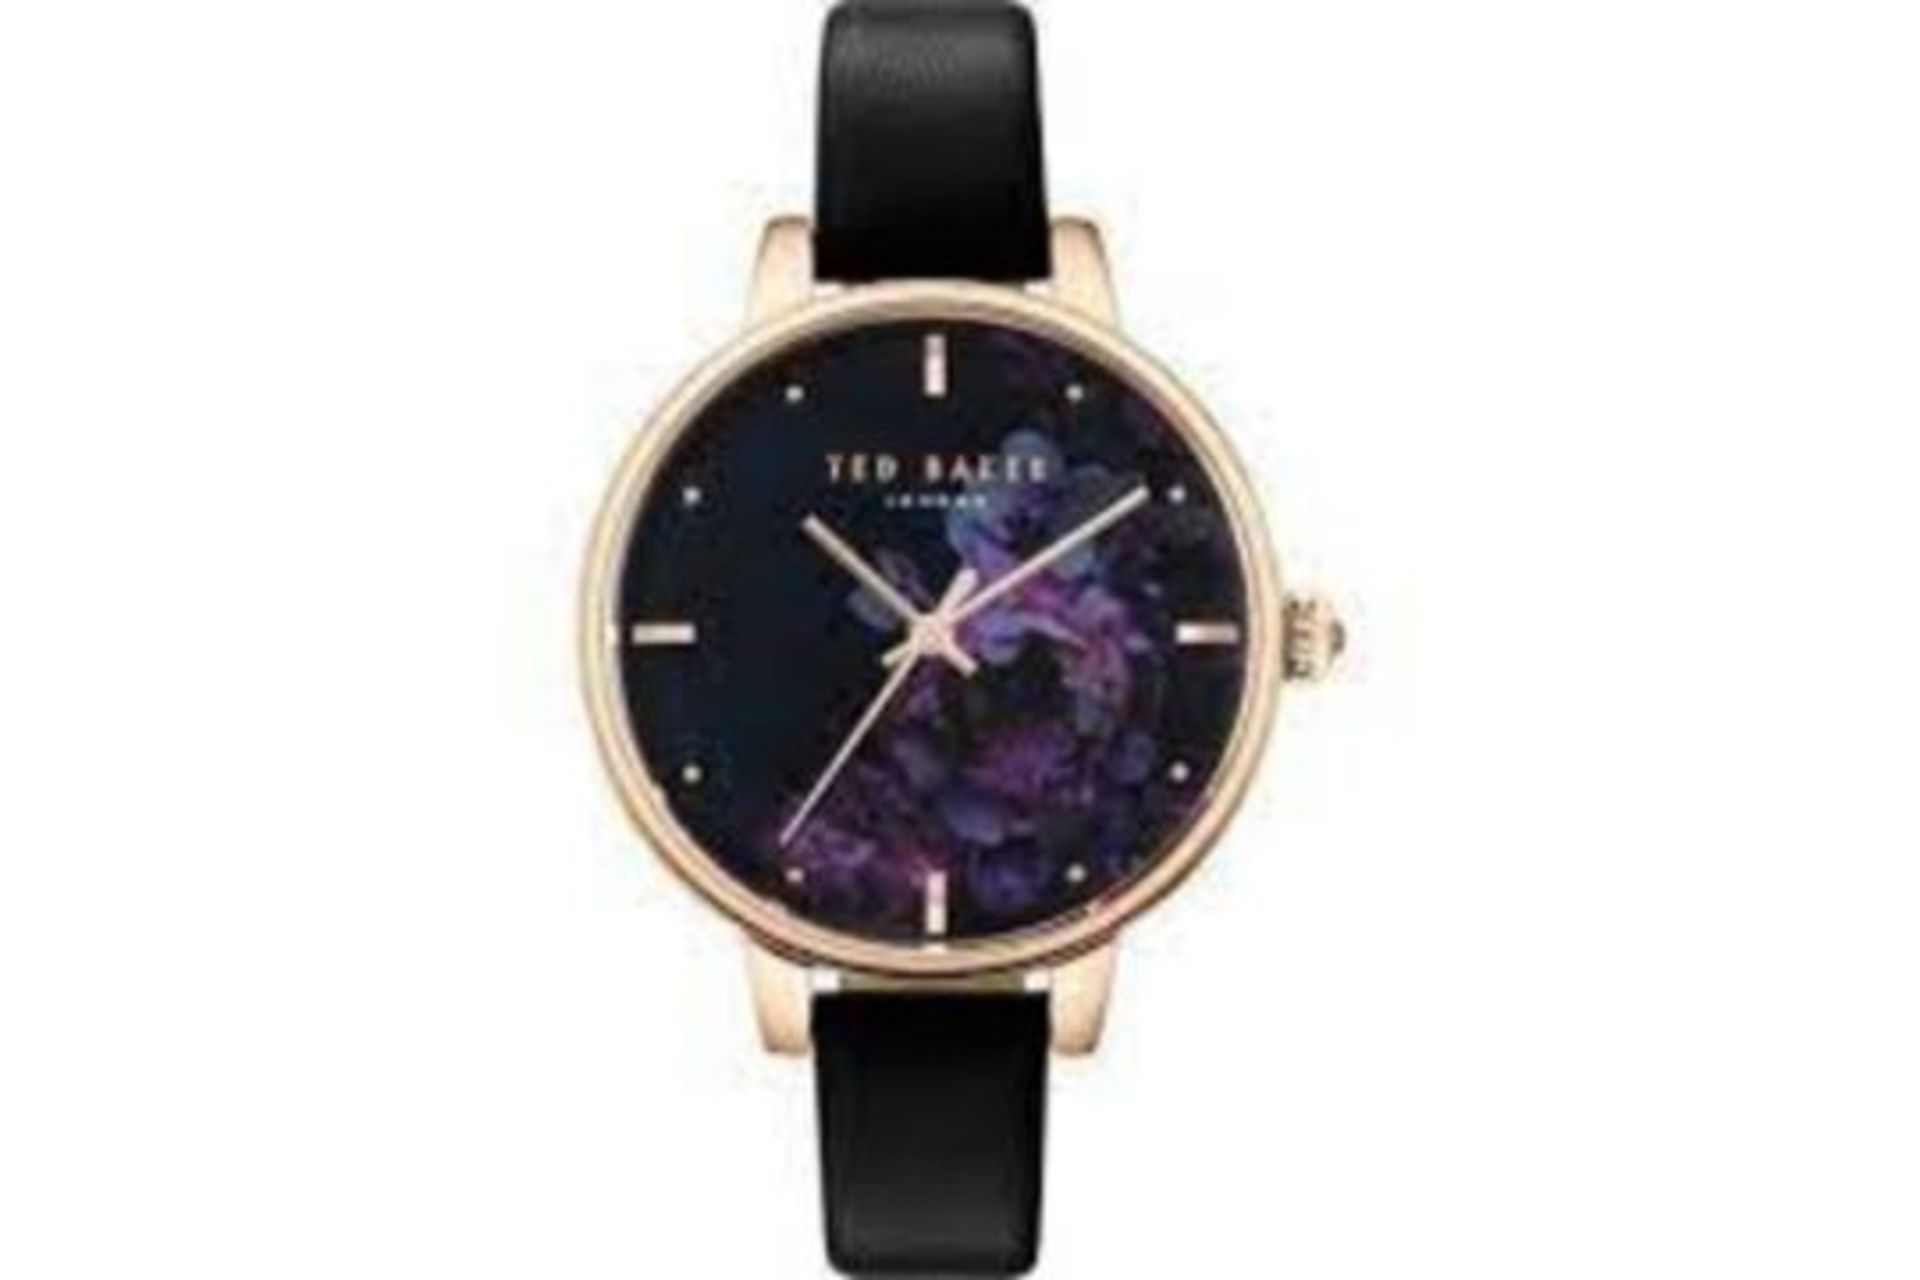 BRAND NEW TED BAKER BLACK STRAP FLORAL BLACK DIAL FASHION WATCH RRP £199